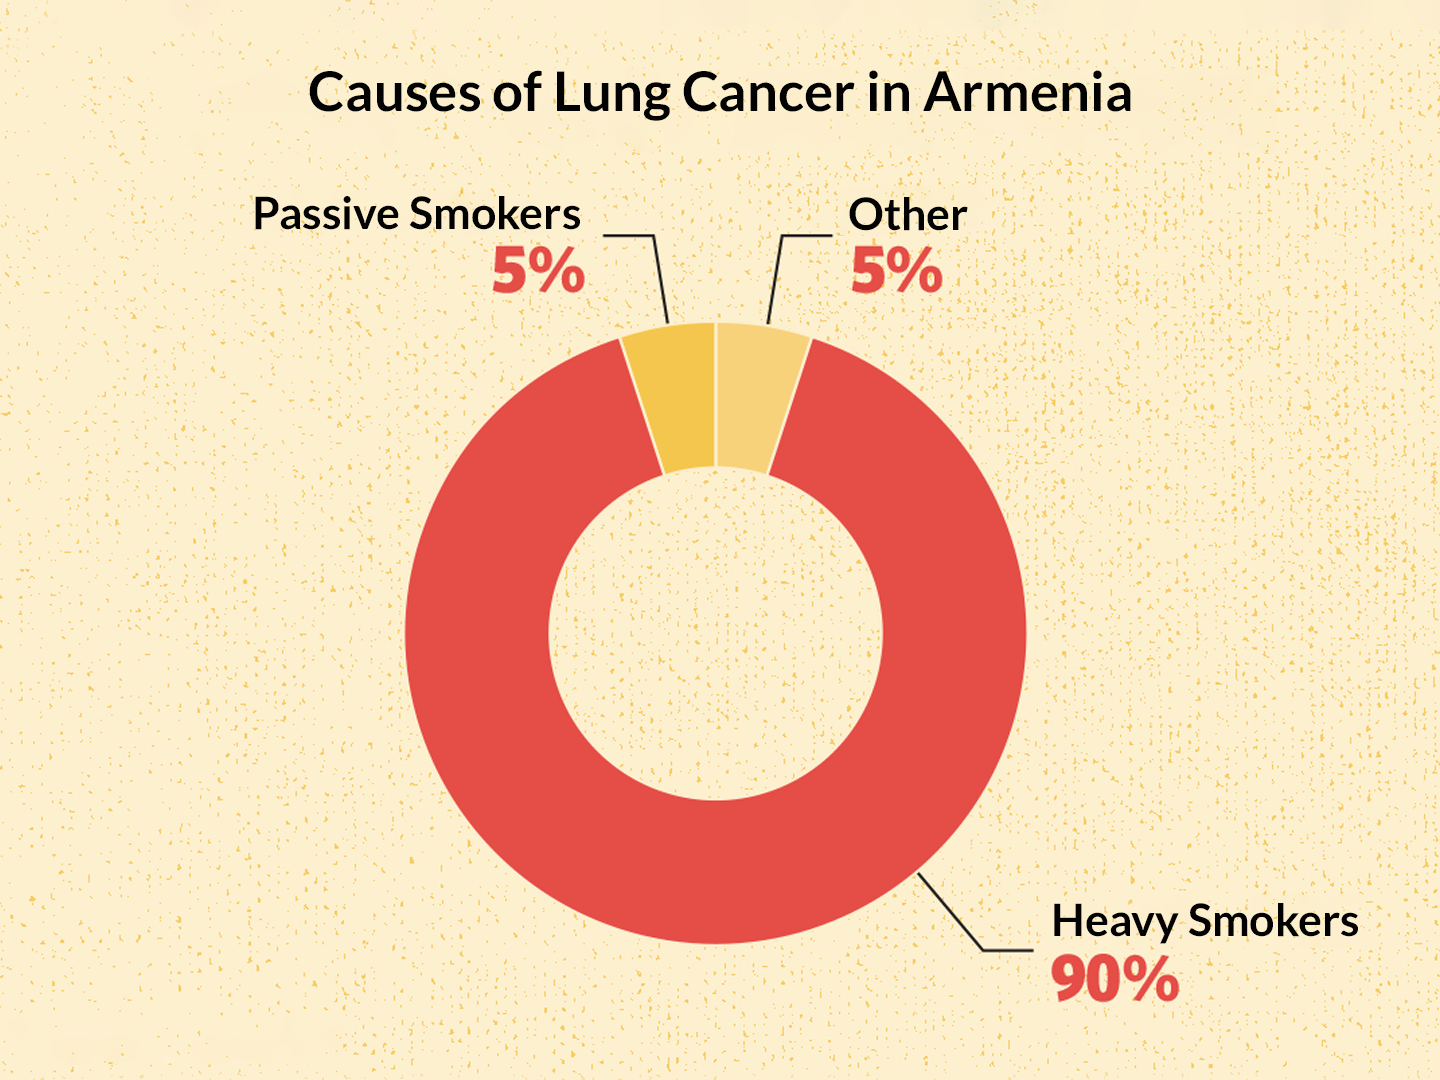 Graph showing the causes of lung cancer in Armenia, the vast majority - 90% - is caused by heavy smokers.